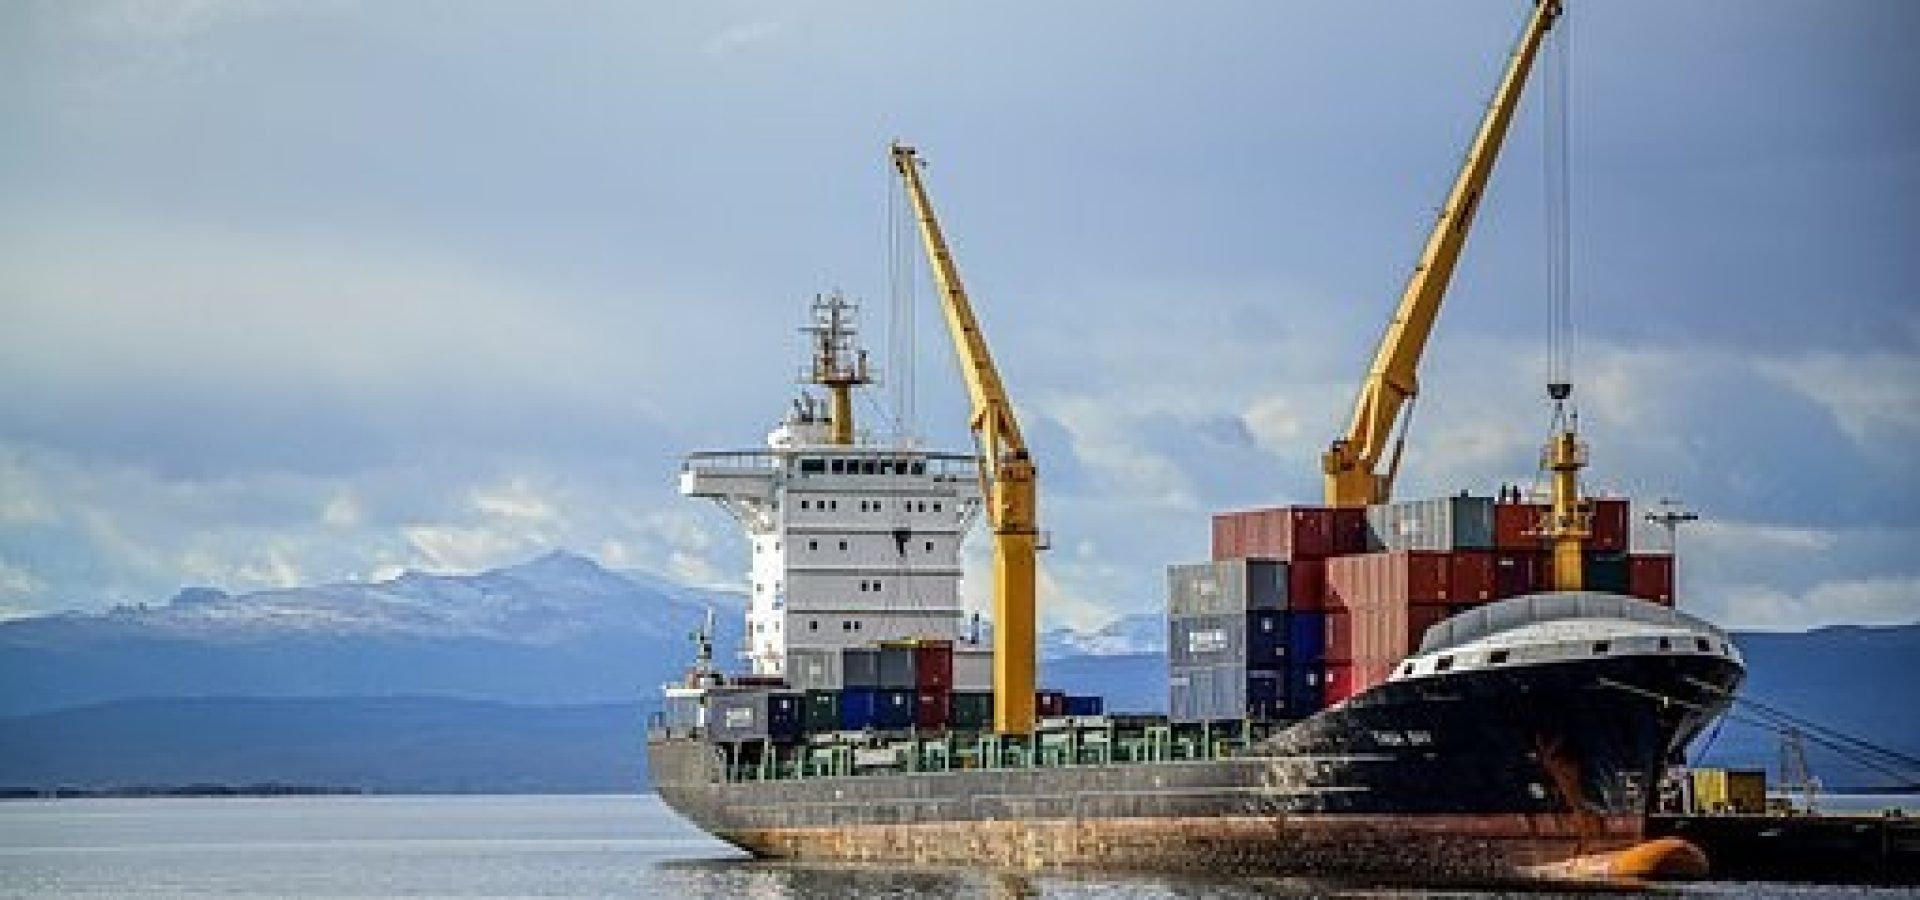 No new ship is allowed to export grain across the Black Sea